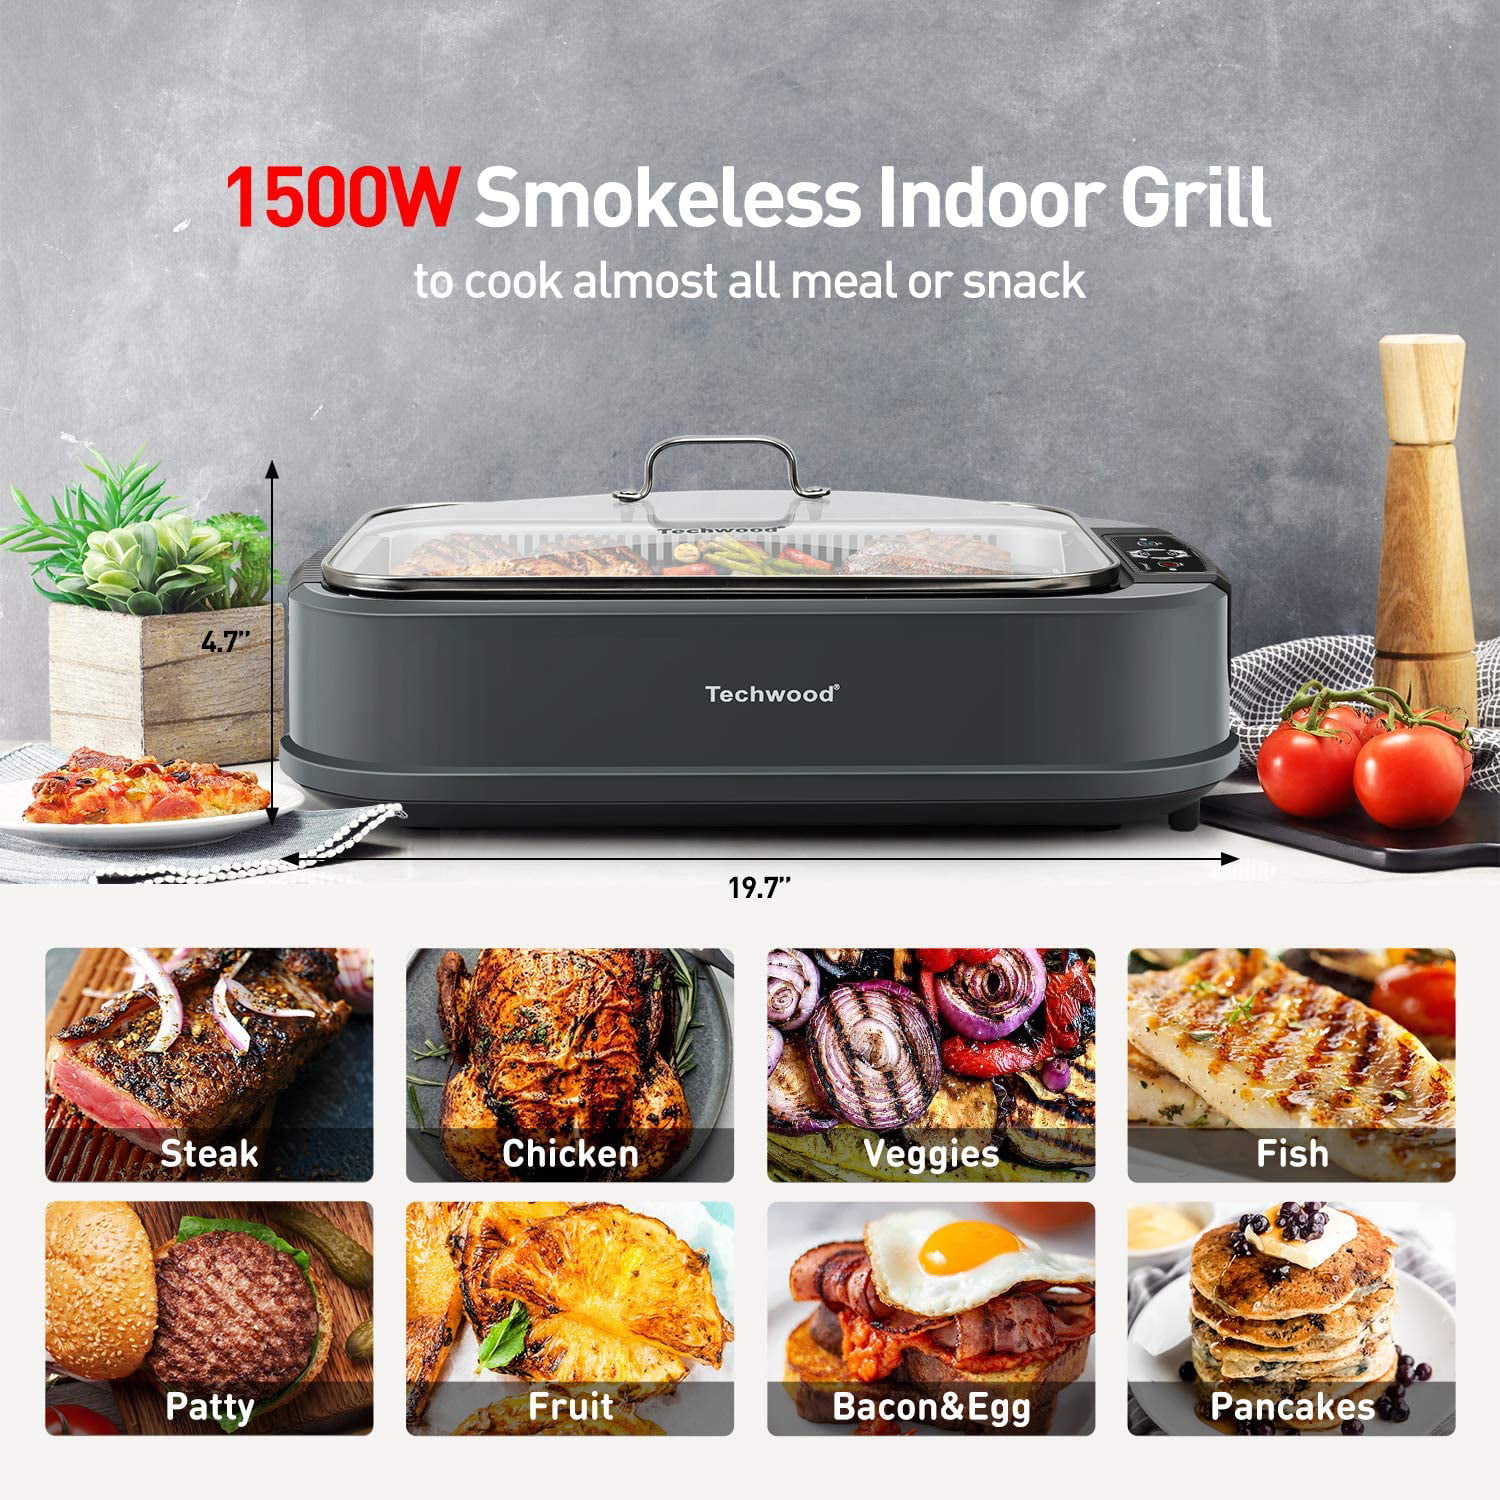 Indoor Smokeless Grill, Techwood 1500W Electric Indoor Grill with Tempered  Glass Lid, Portable Non-stick BBQ Korean Grill, Turbo Smoke Extractor